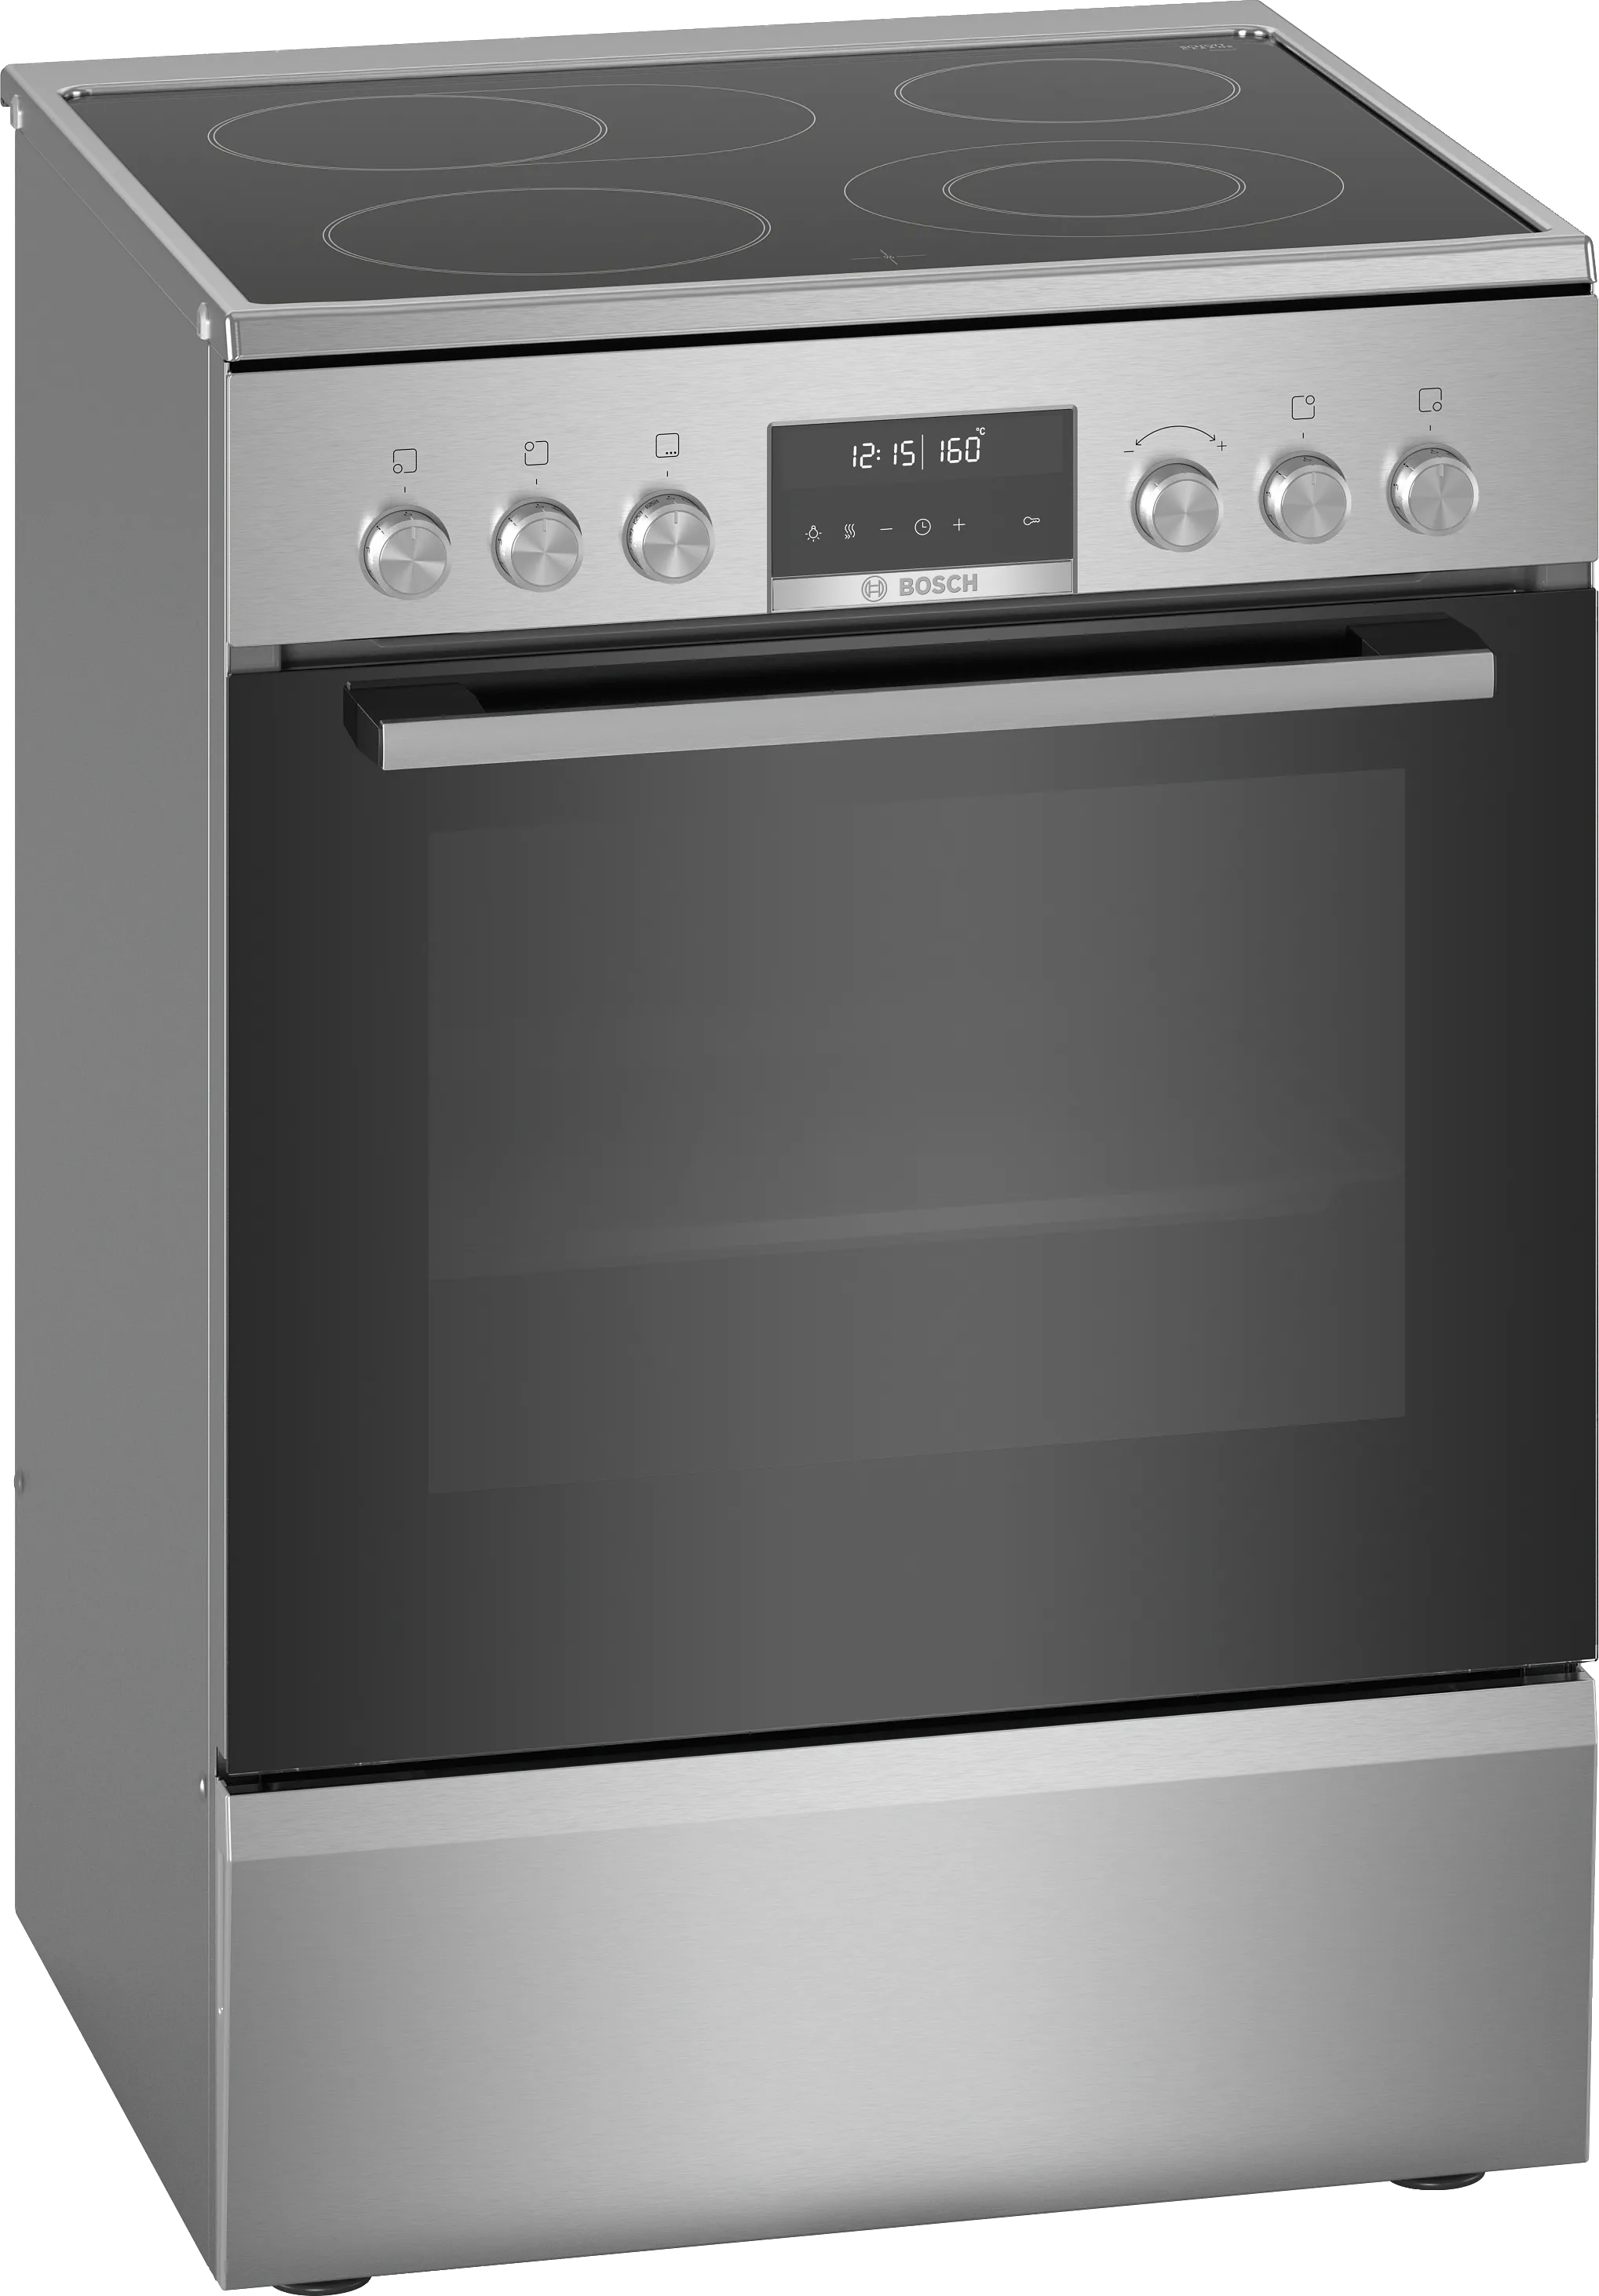 Série 6 free-standing electric cooker Inox 